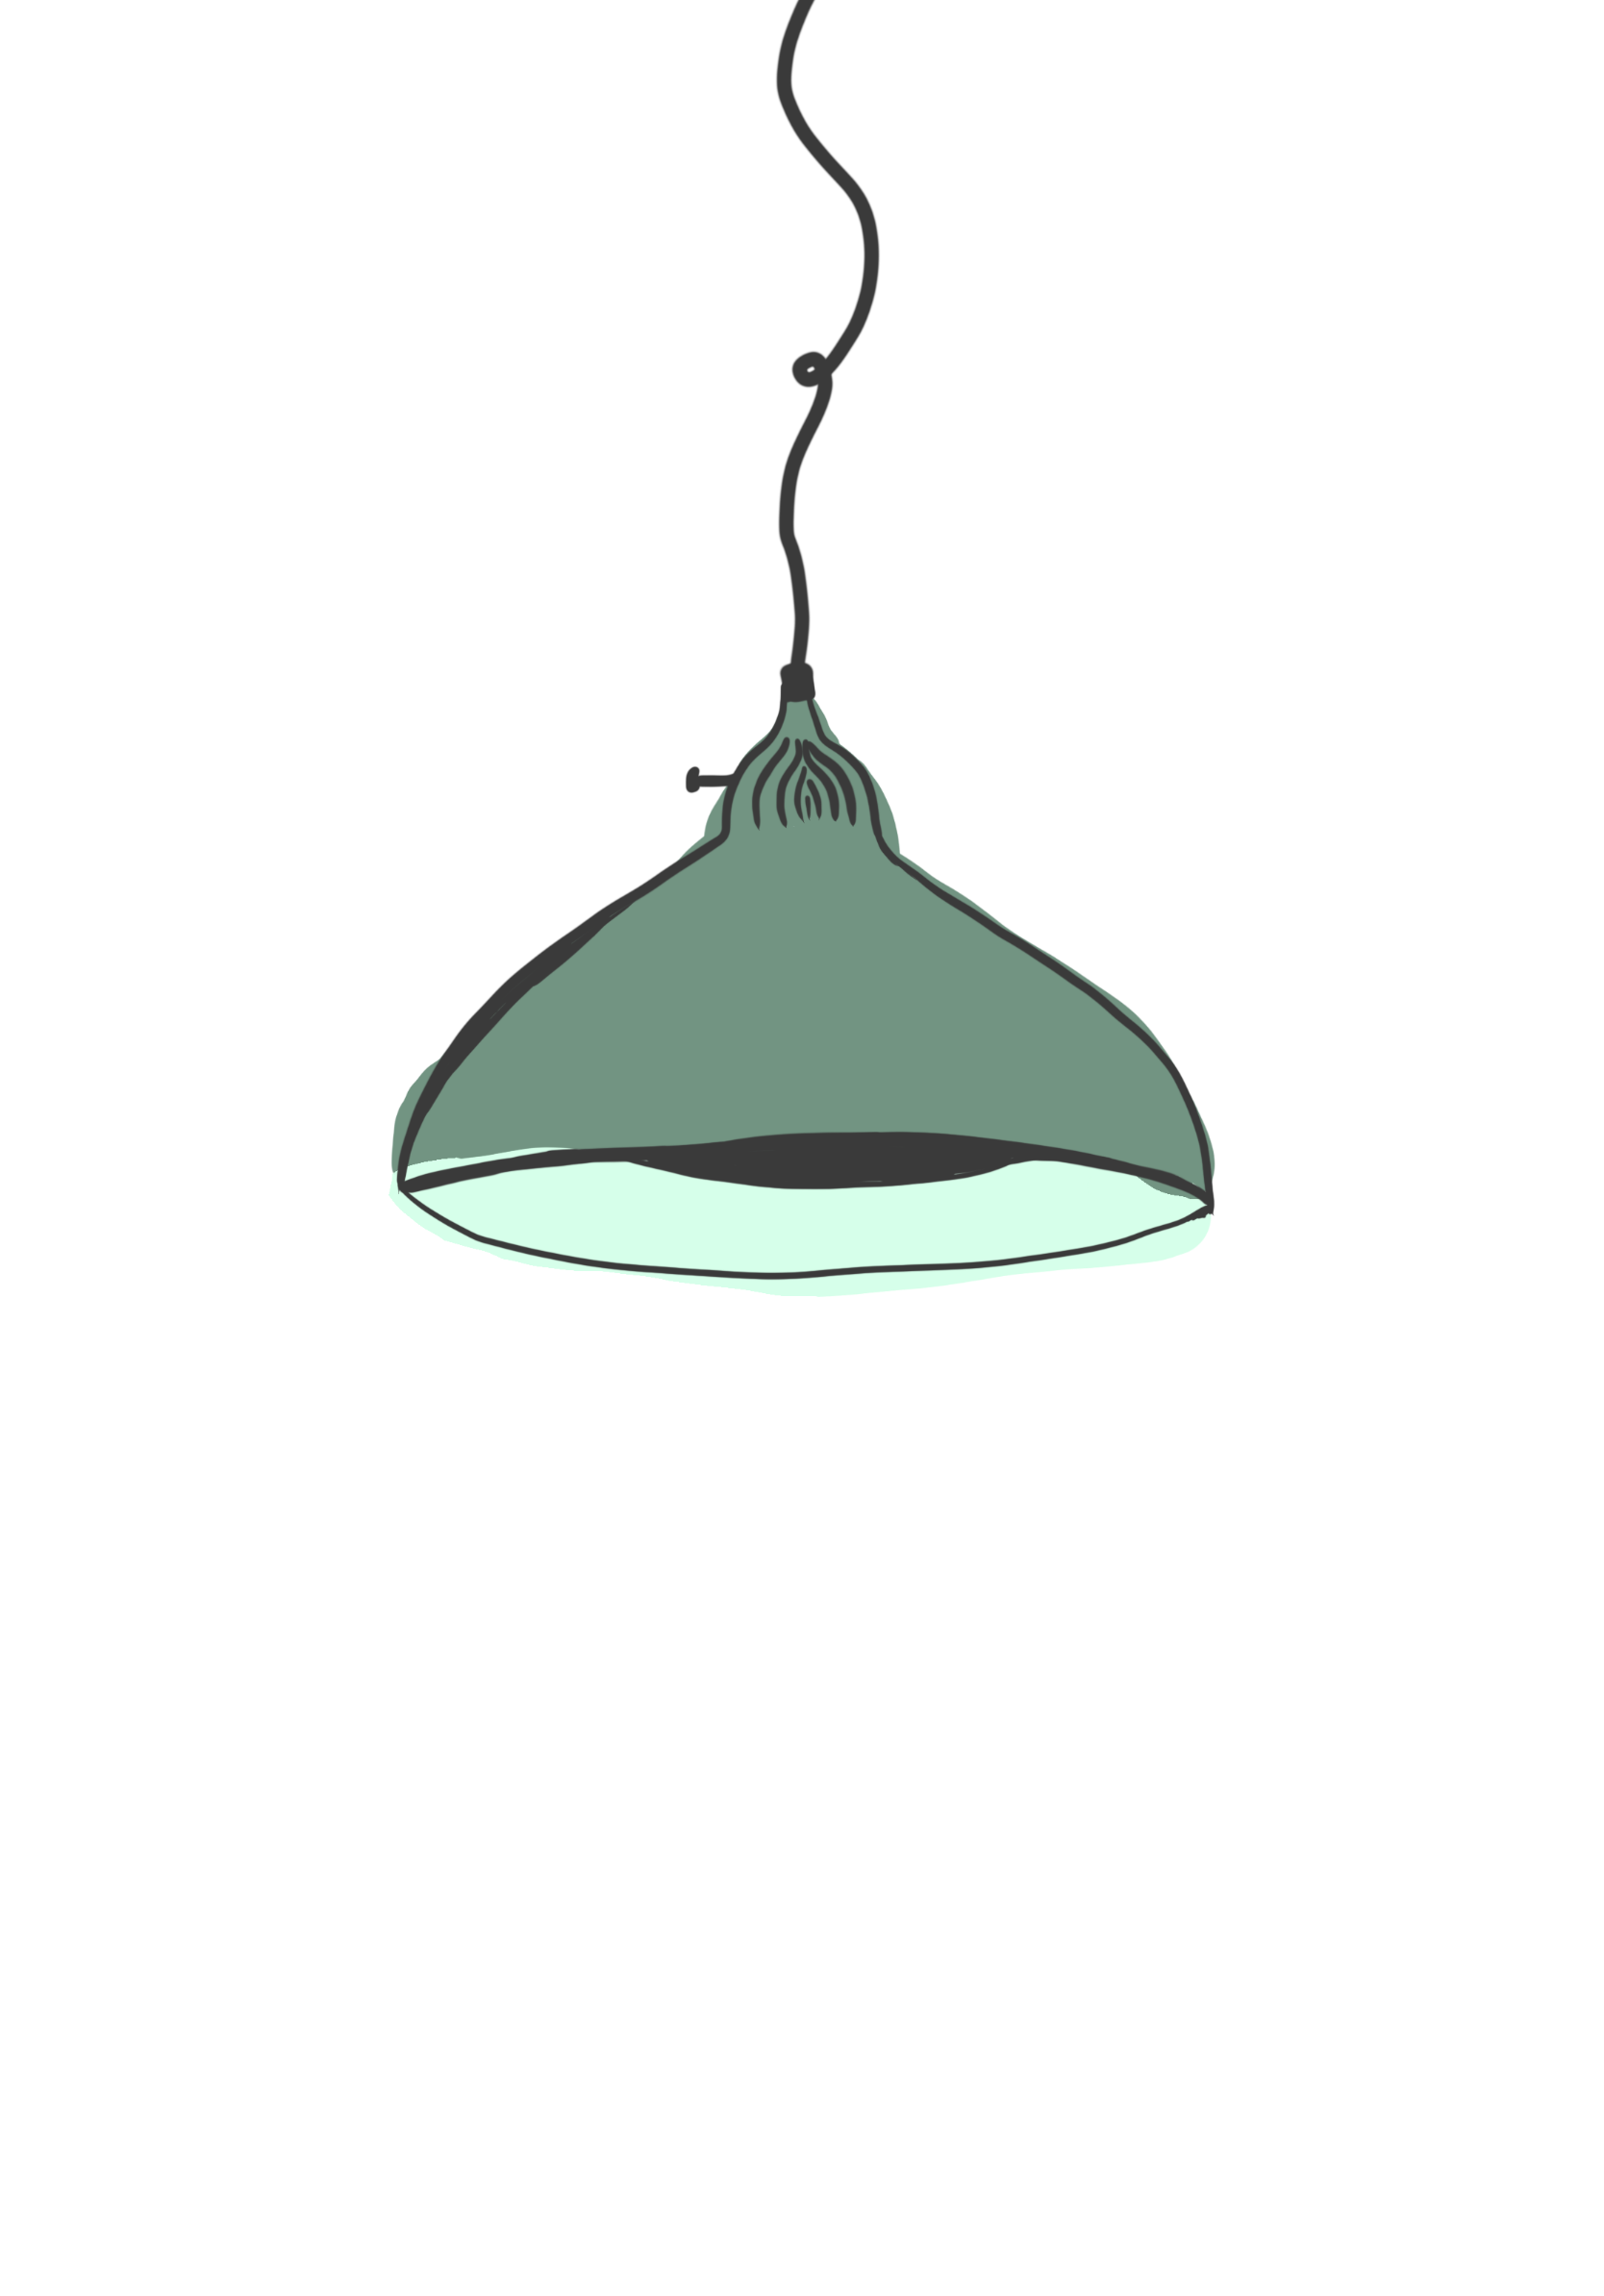 hand-drawn picture of a lamp